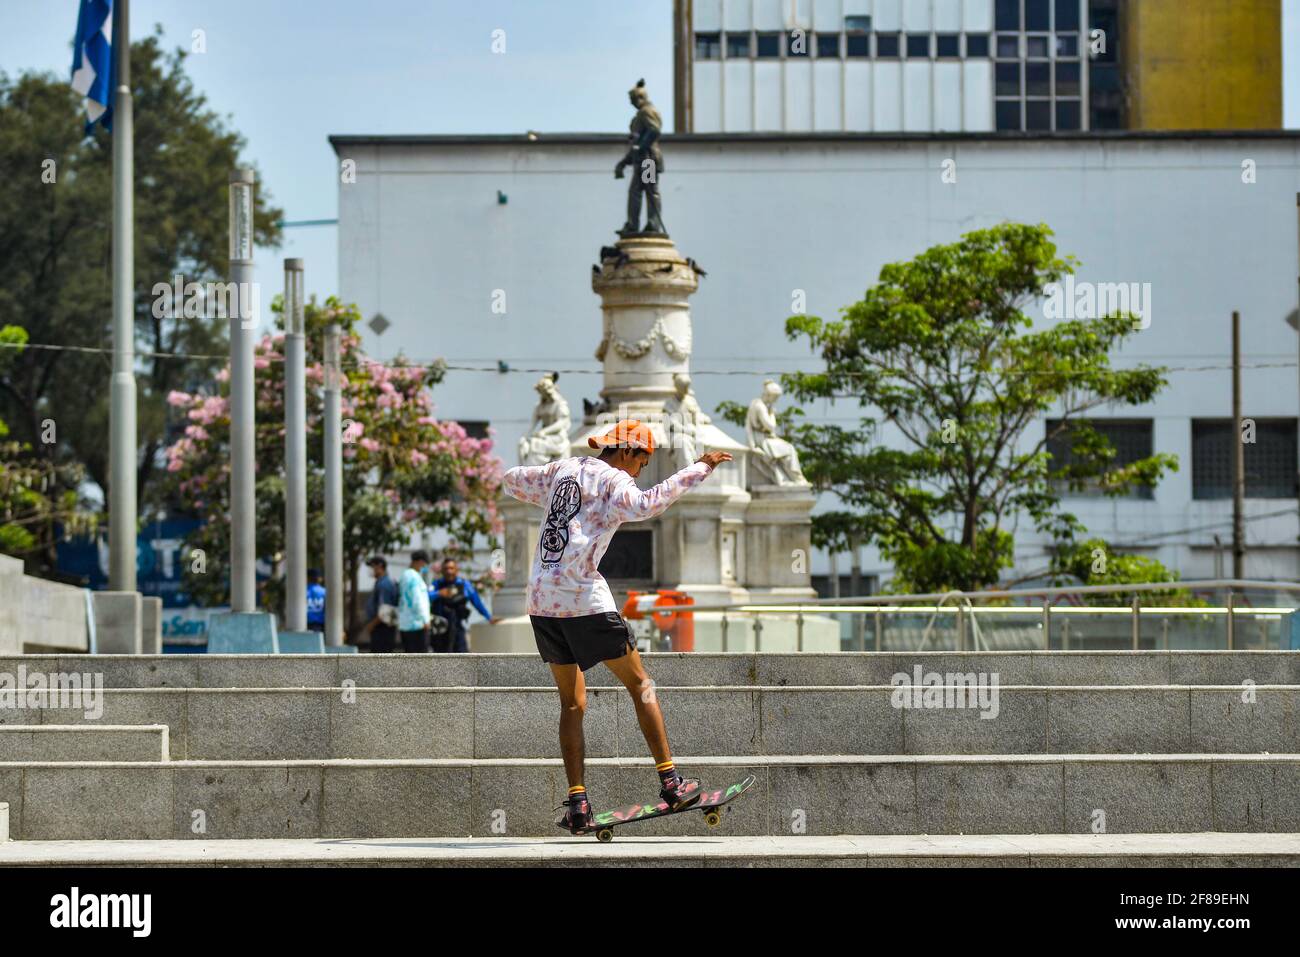 A man skates in front of the Francisco Morazan Plaza.El Salvador reports more than 66 thousand confirmed COVID-19 cases as well as 2,054 deaths. Stock Photo